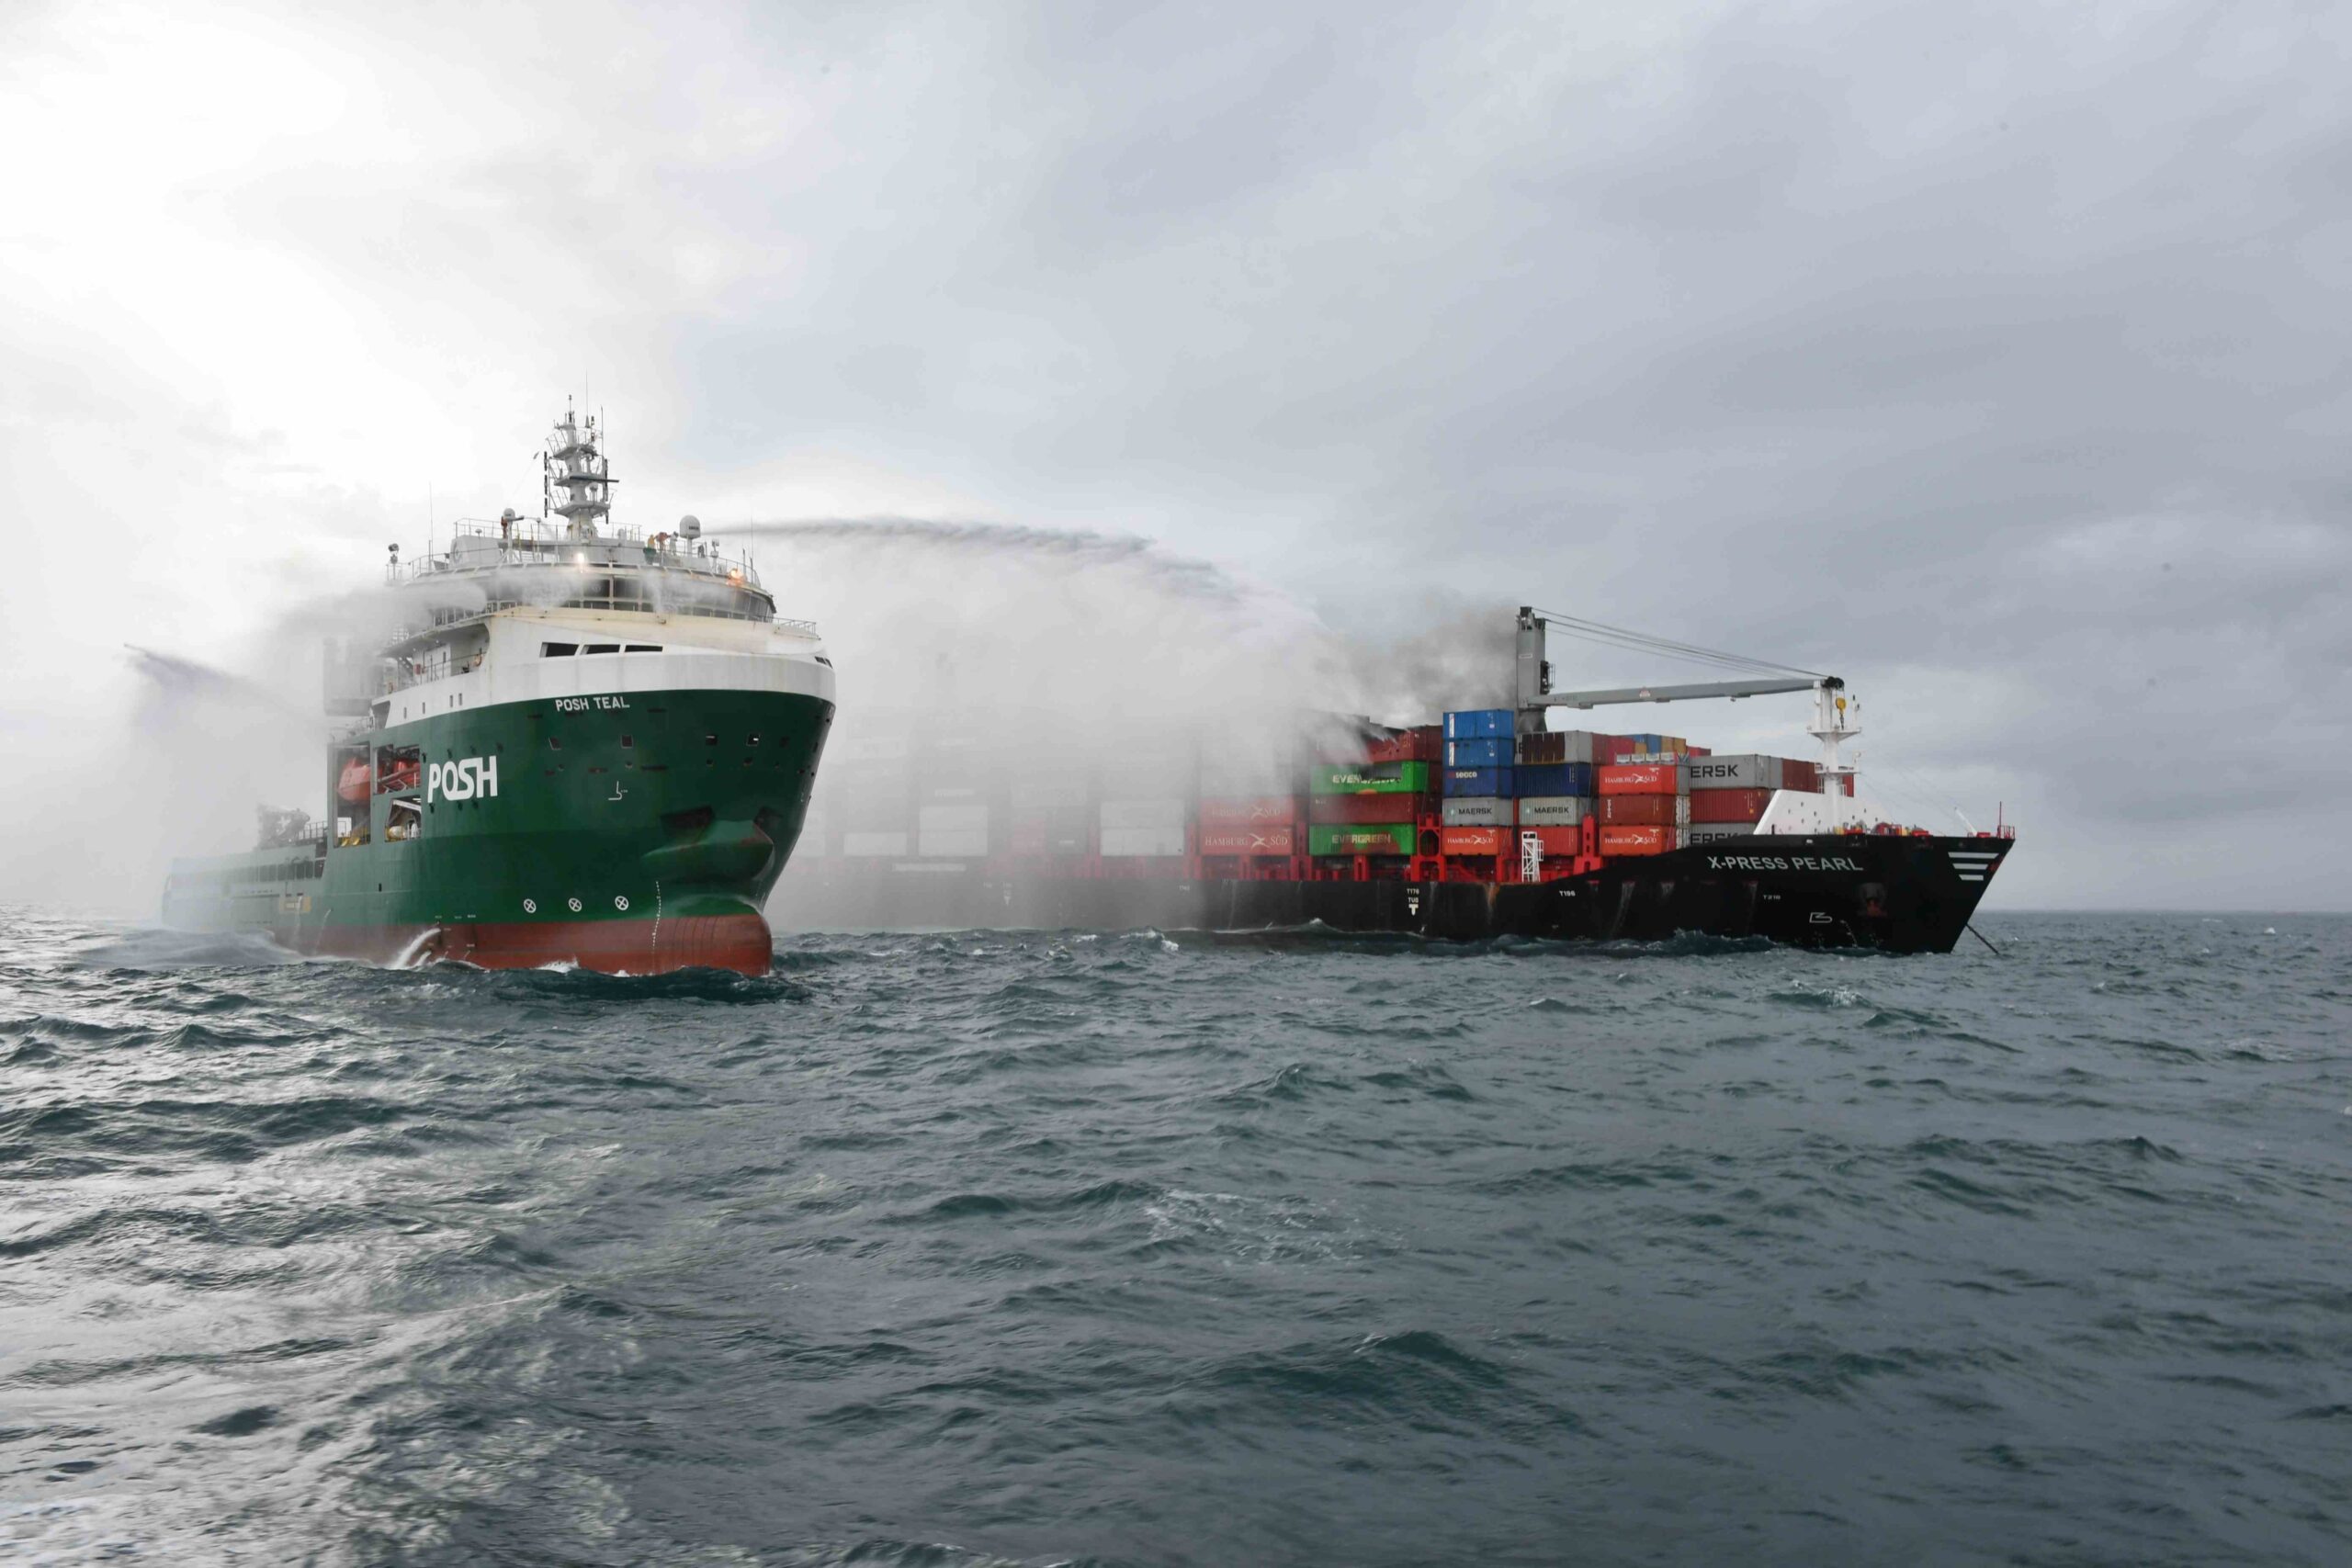 DBI to untie Gordian knot for fires at sea